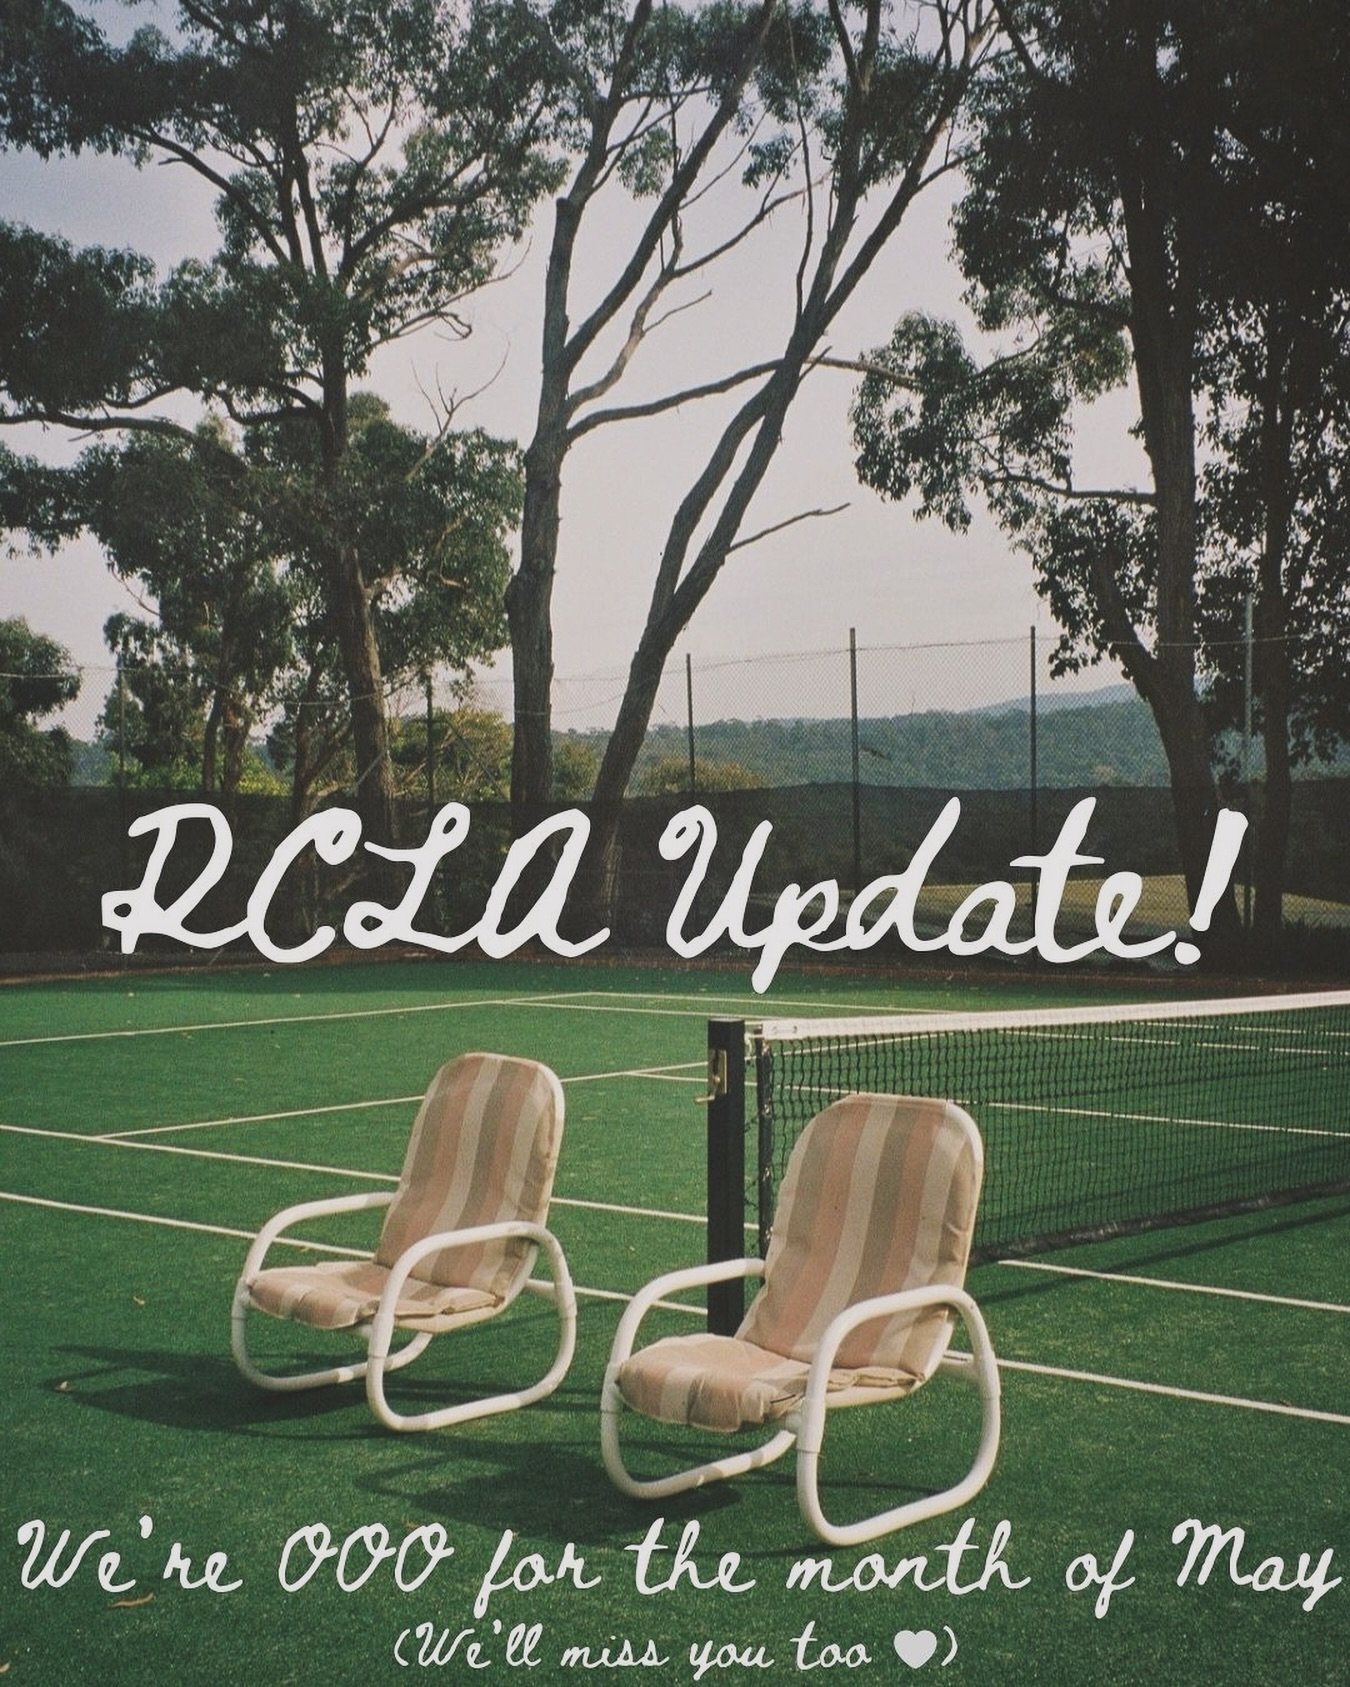 Team RCLA is skipping the May grey ✈️🎾

Just a friendly PSA that we do not have any clinics or meetups planned for the month of May (sorry!) 

So hit up your new or old RCLA buddies and keep practicing 🫶 see y&rsquo;all soon!